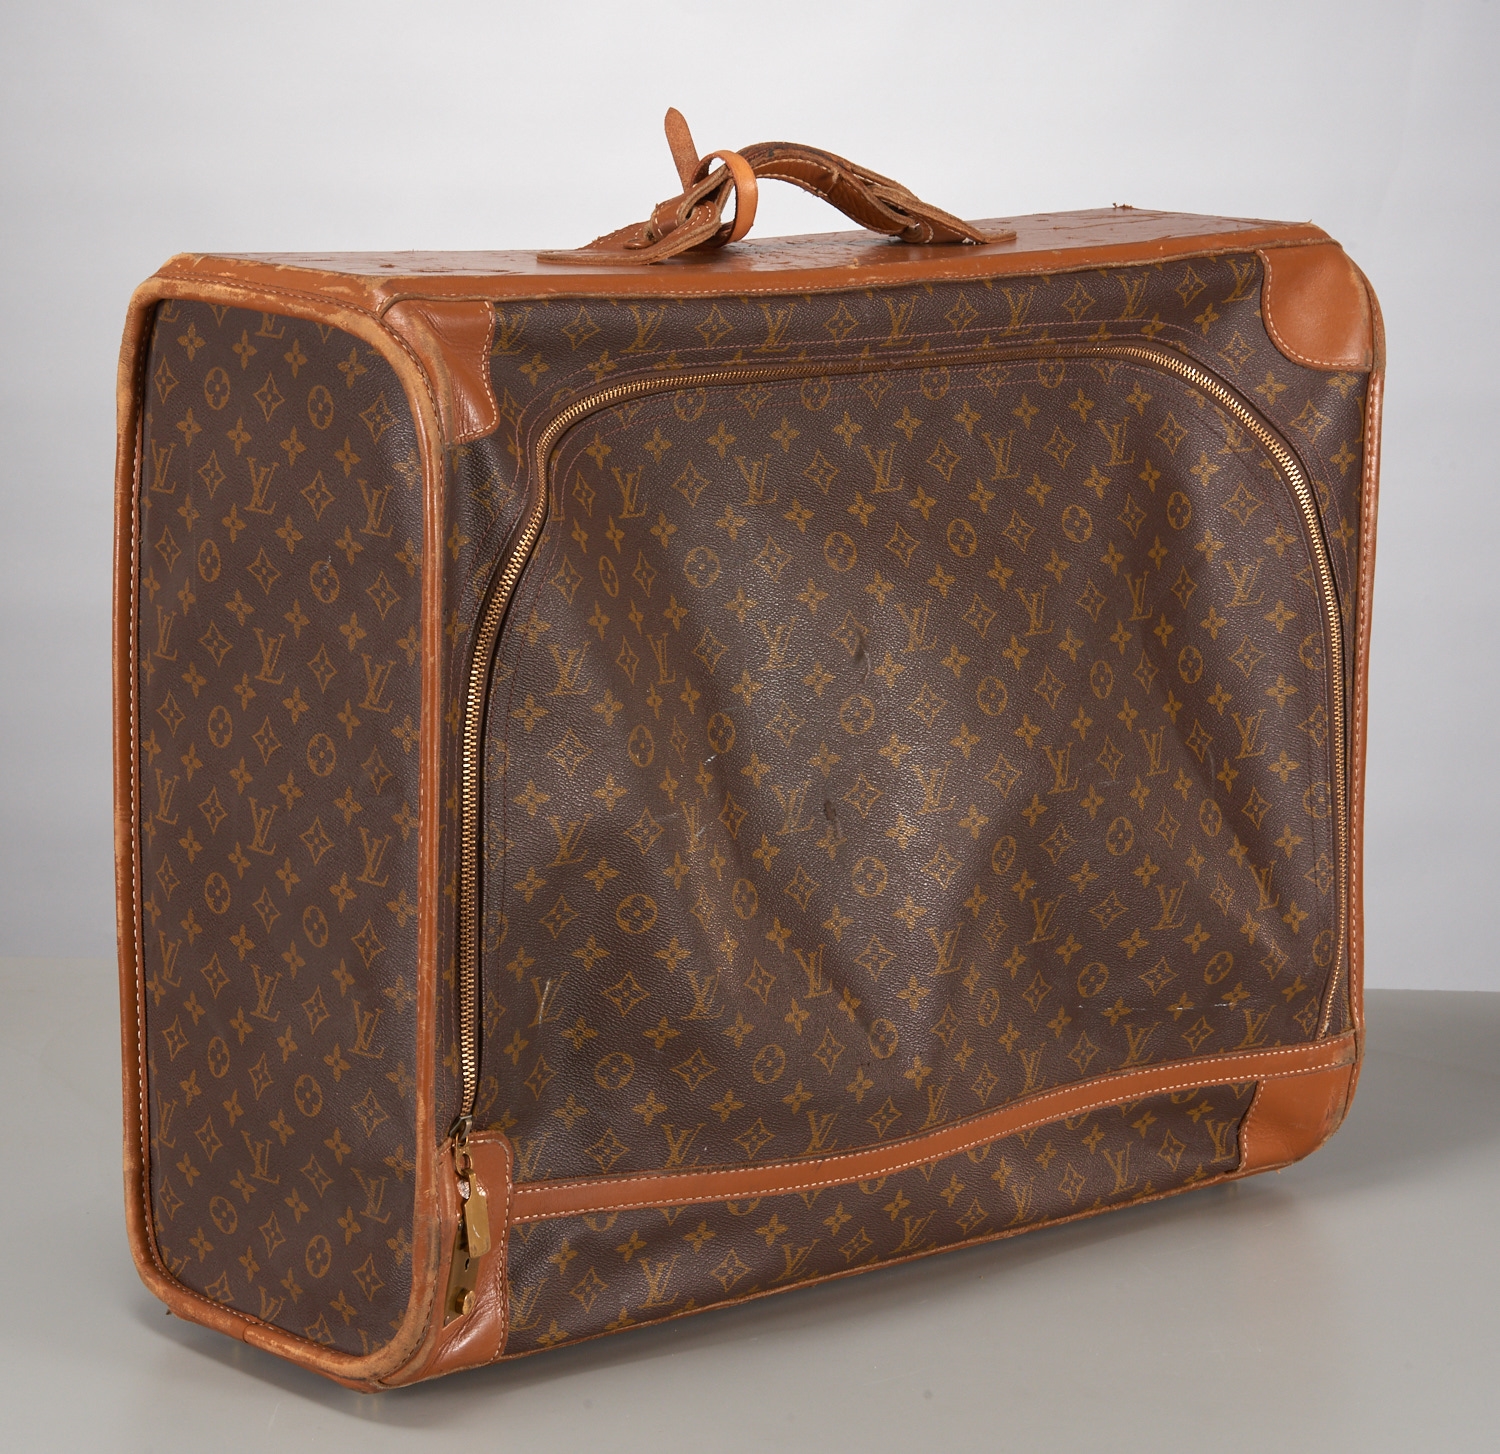 Lot - TWO VINTAGE LOUIS VUITTON HARD-SIDED SUITCASES